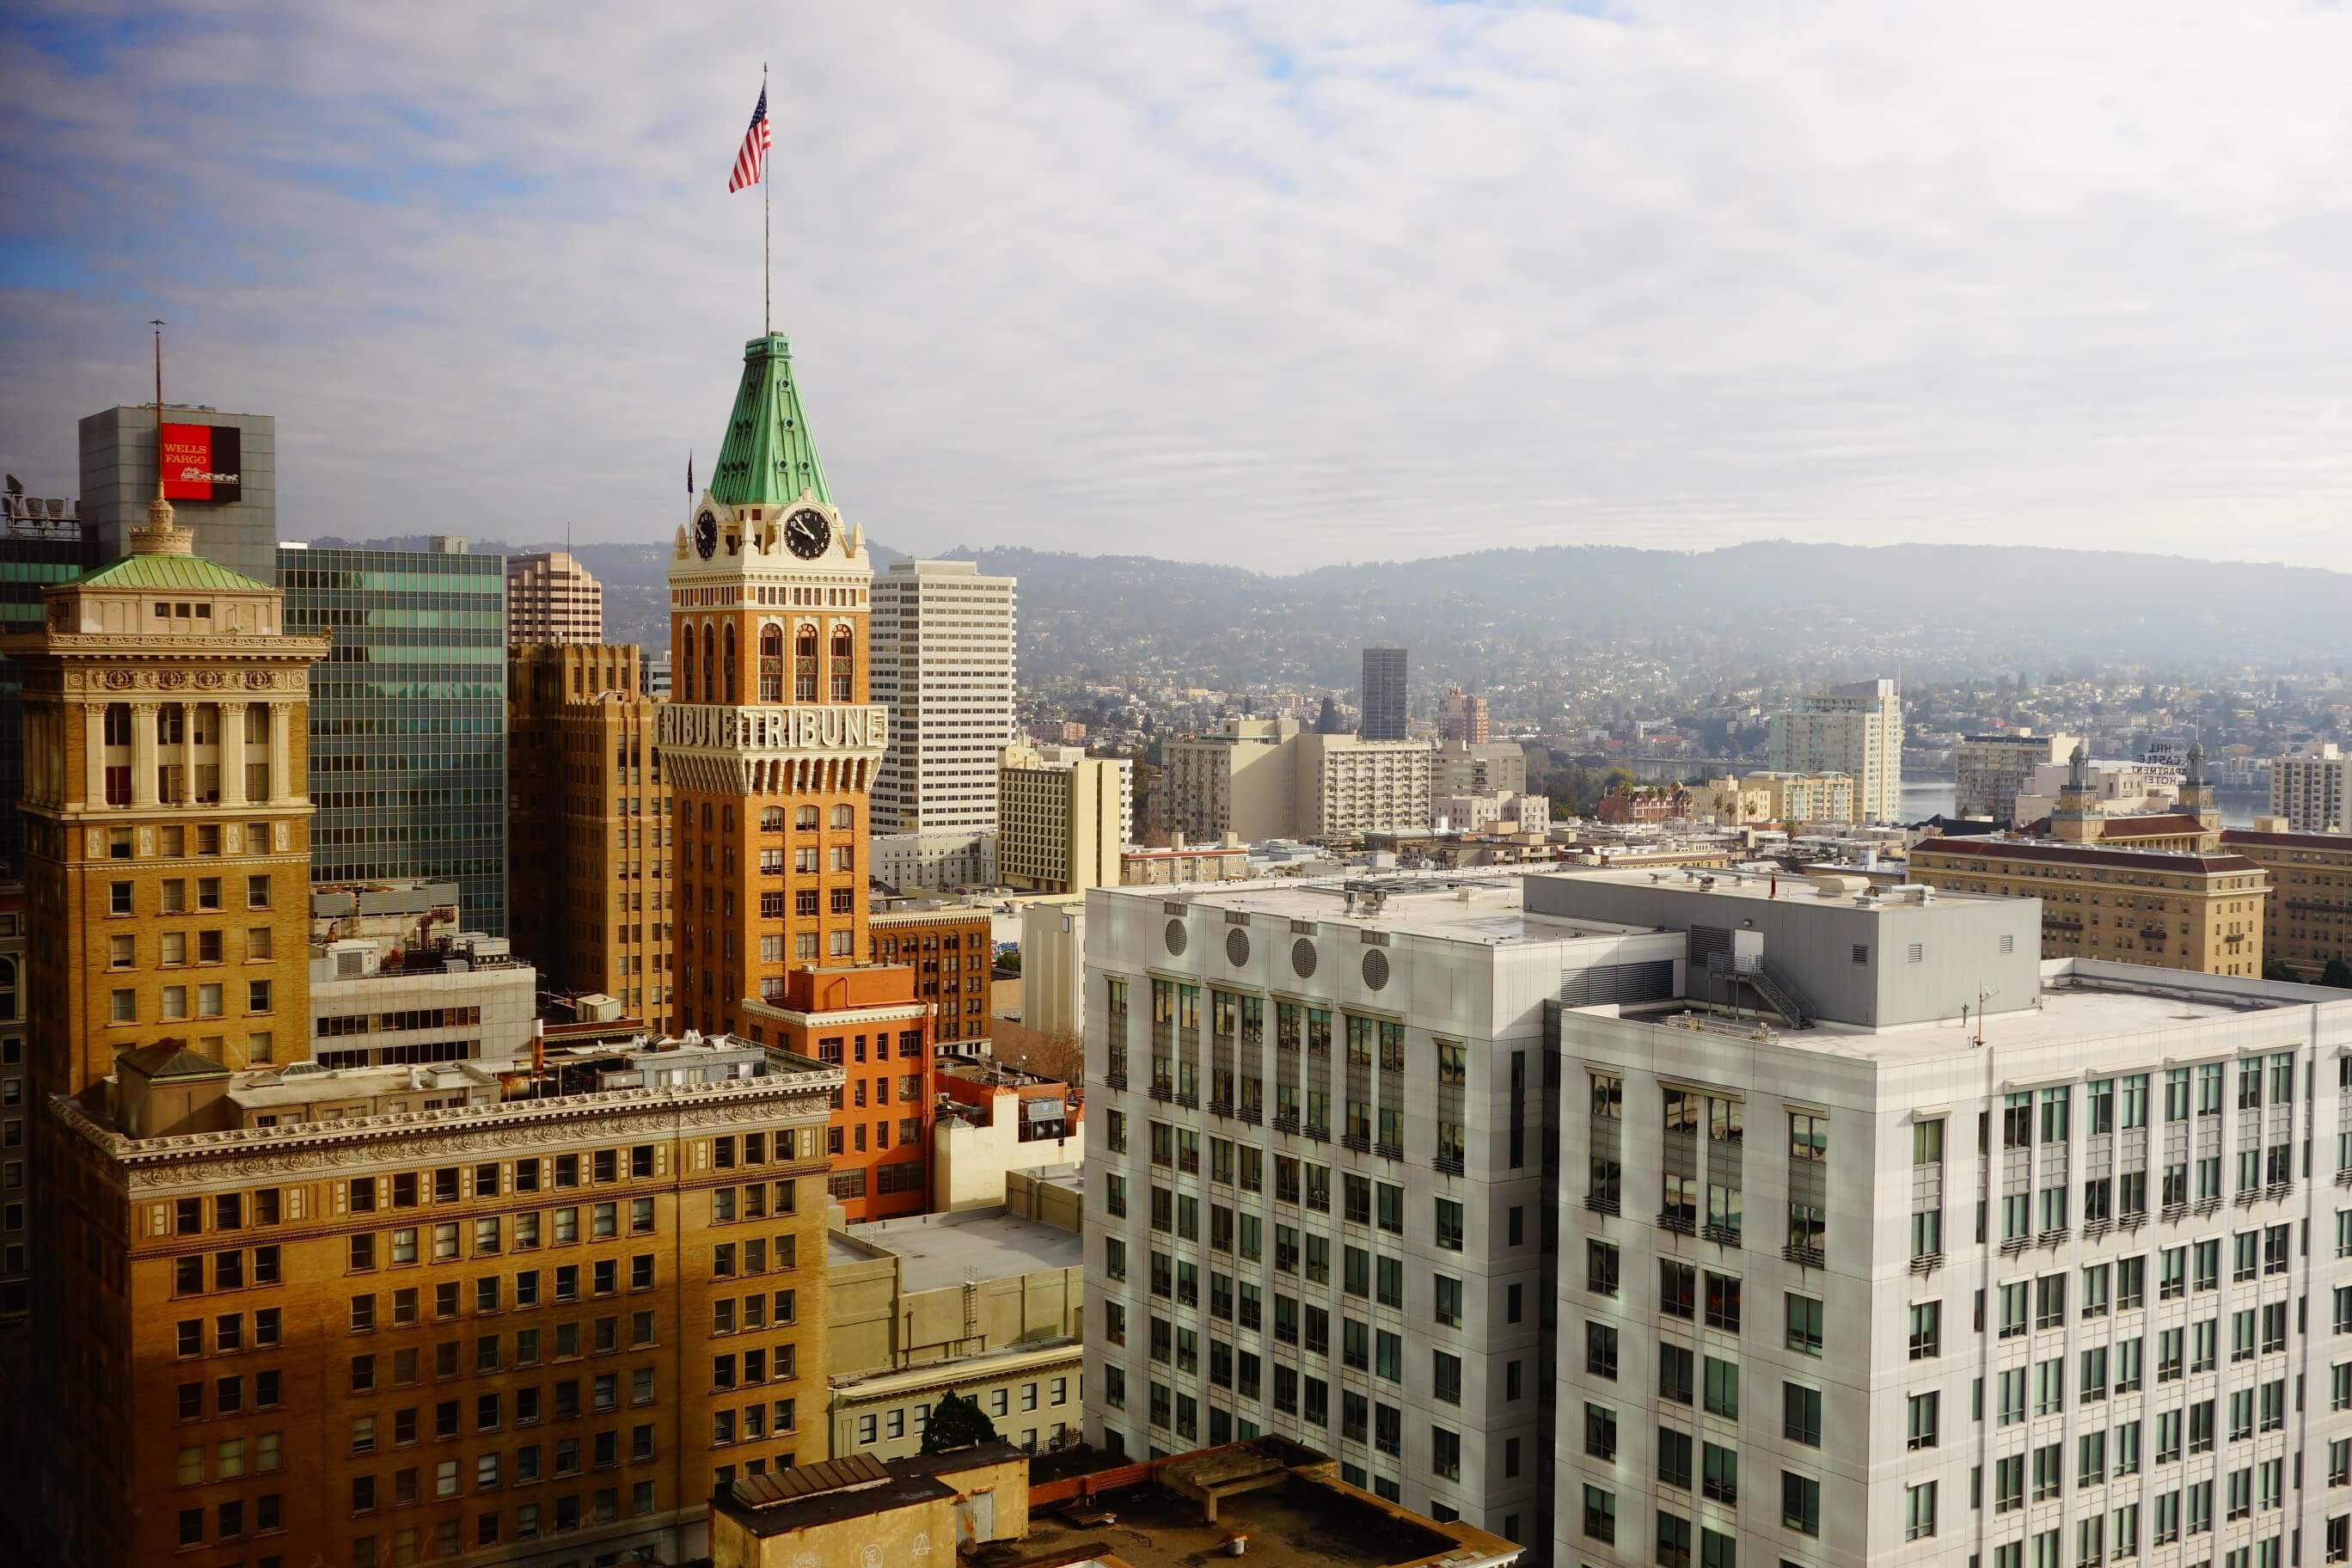 Oakland is the third largest city in the Bay Area.